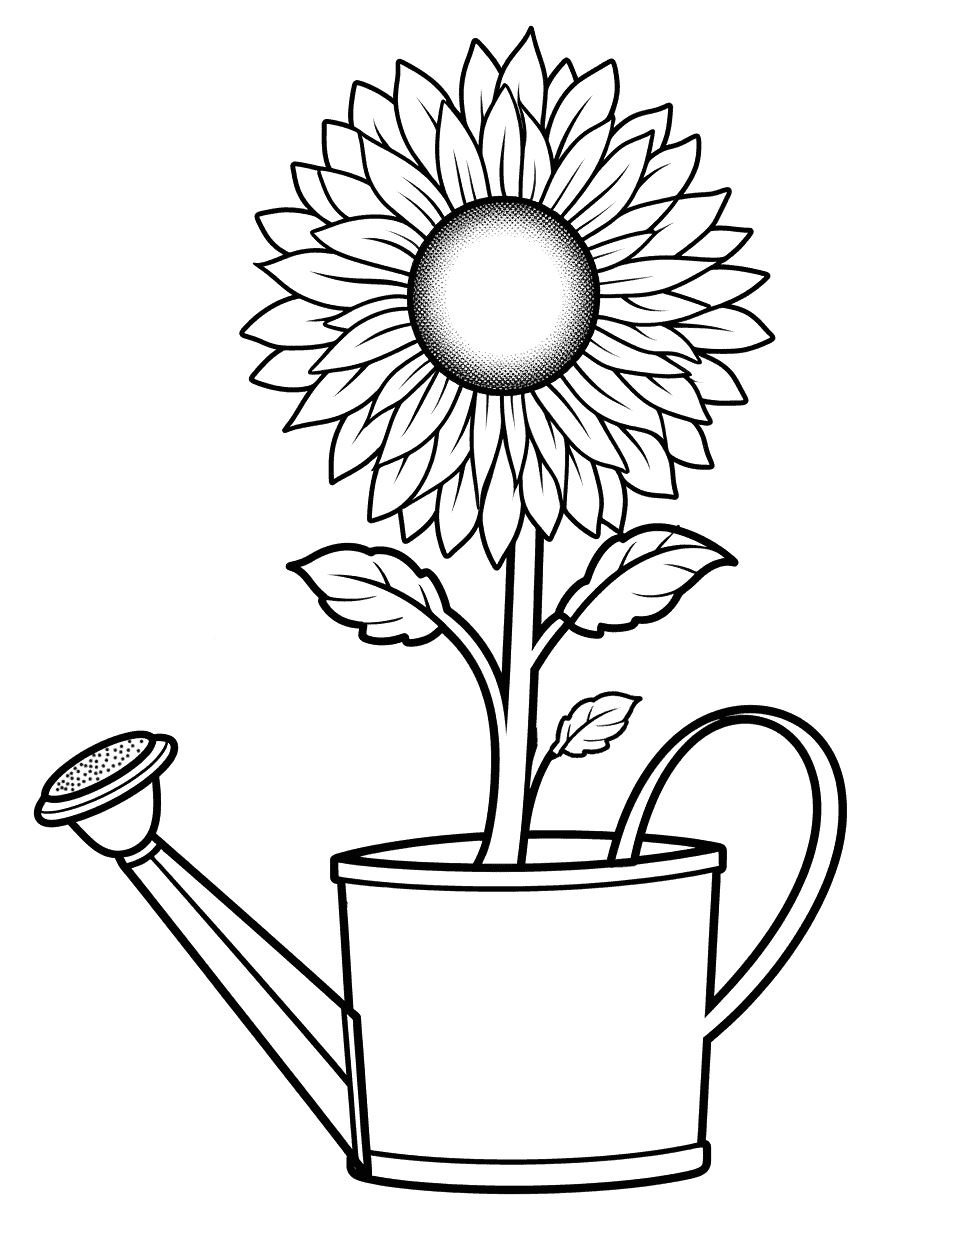 Watering Can Sunflower Coloring Page - A sunflower planted in a garden watering can.